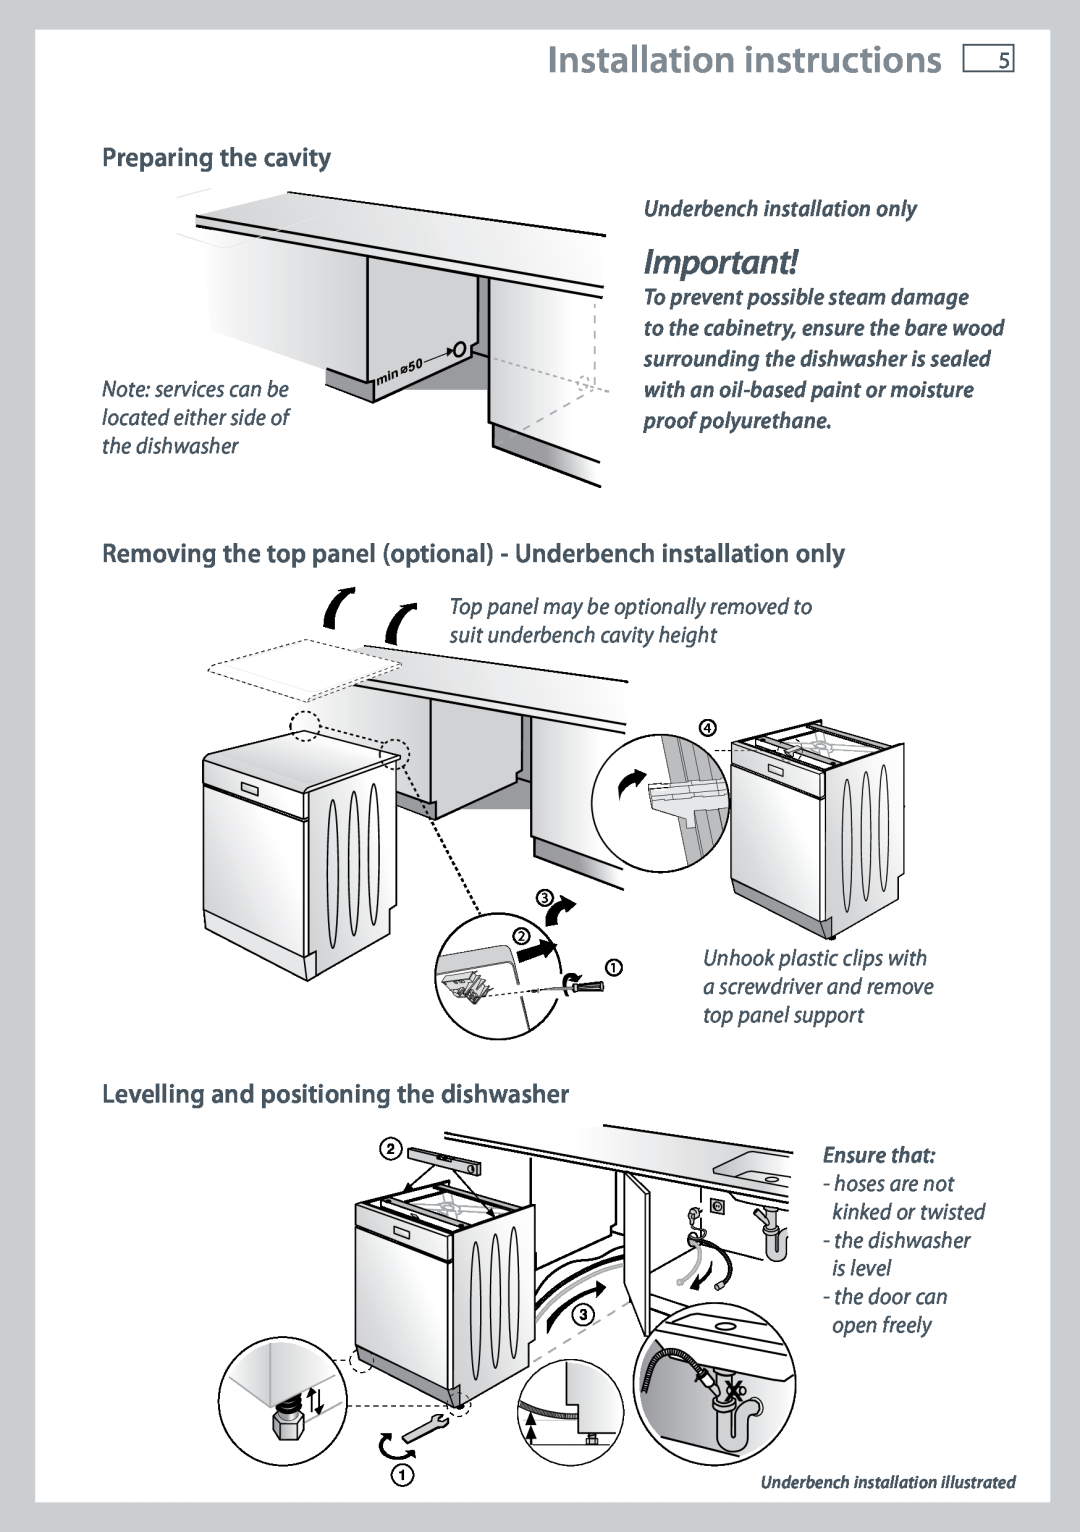 Fisher & Paykel DW60DOX Installation instructions, Preparing the cavity, Levelling and positioning the dishwasher 